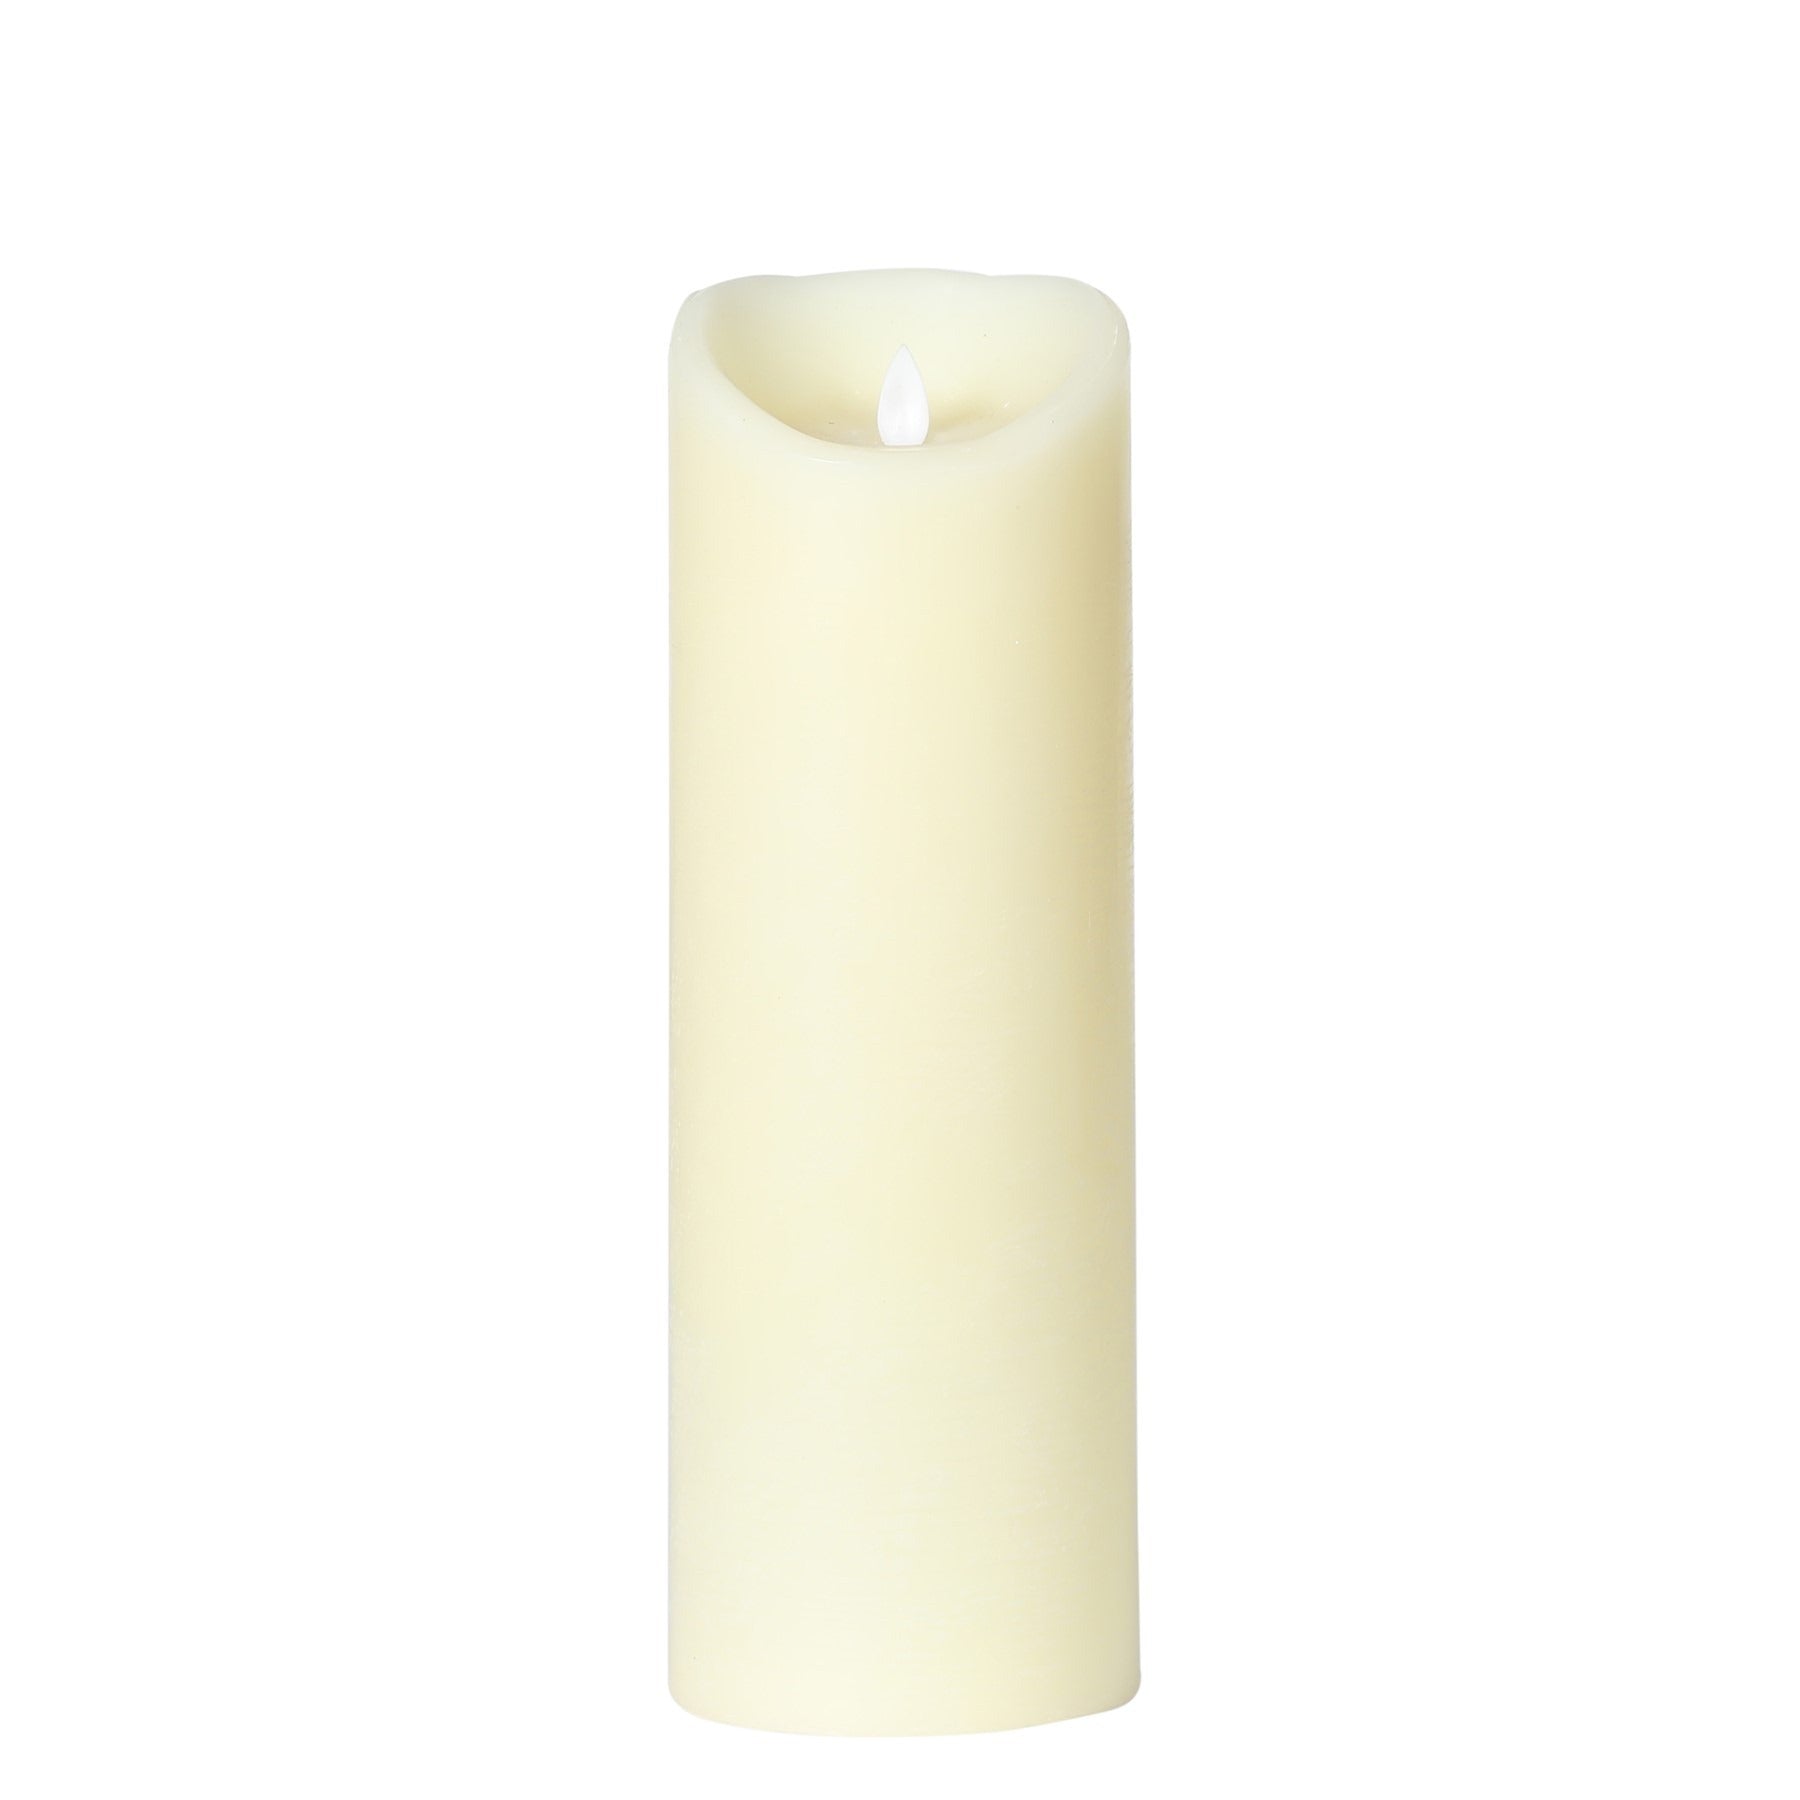 View Moving Flame LED Candle 10 x 30cm information